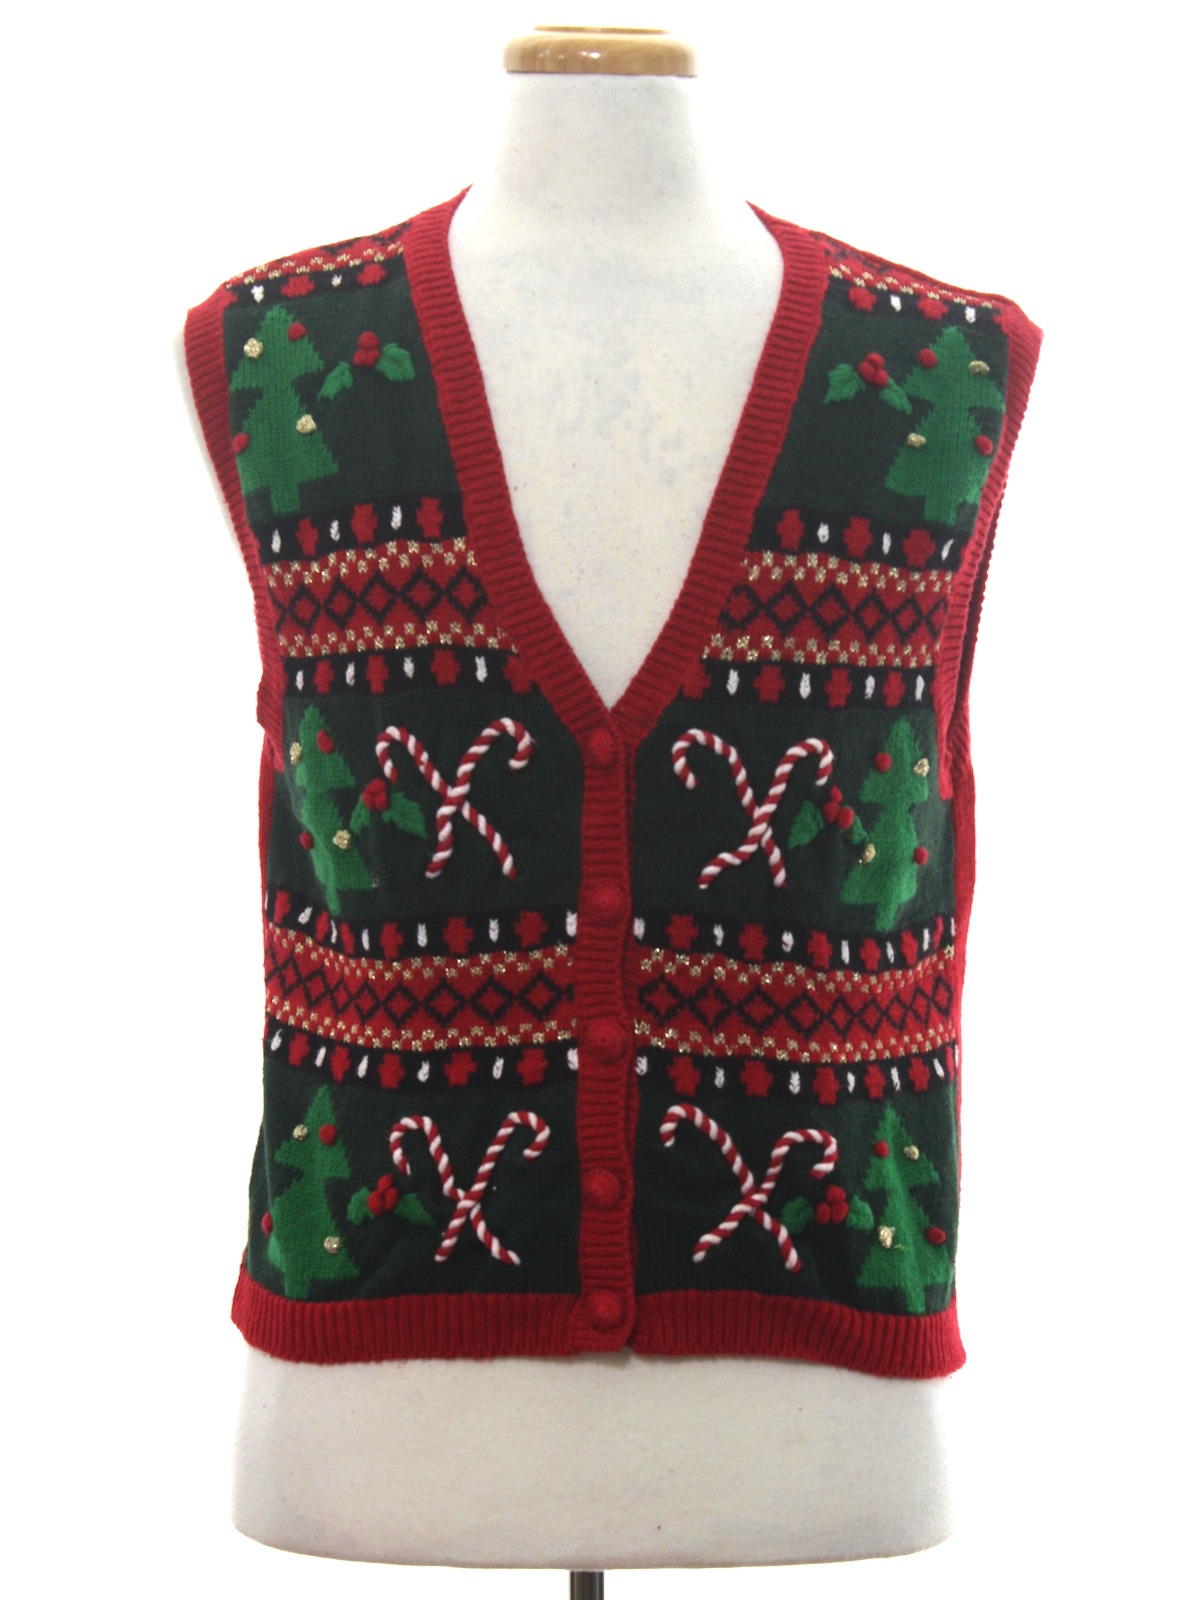 Womens Ugly Christmas Sweater Vest: -Bryn Connelly- Petite Womens red